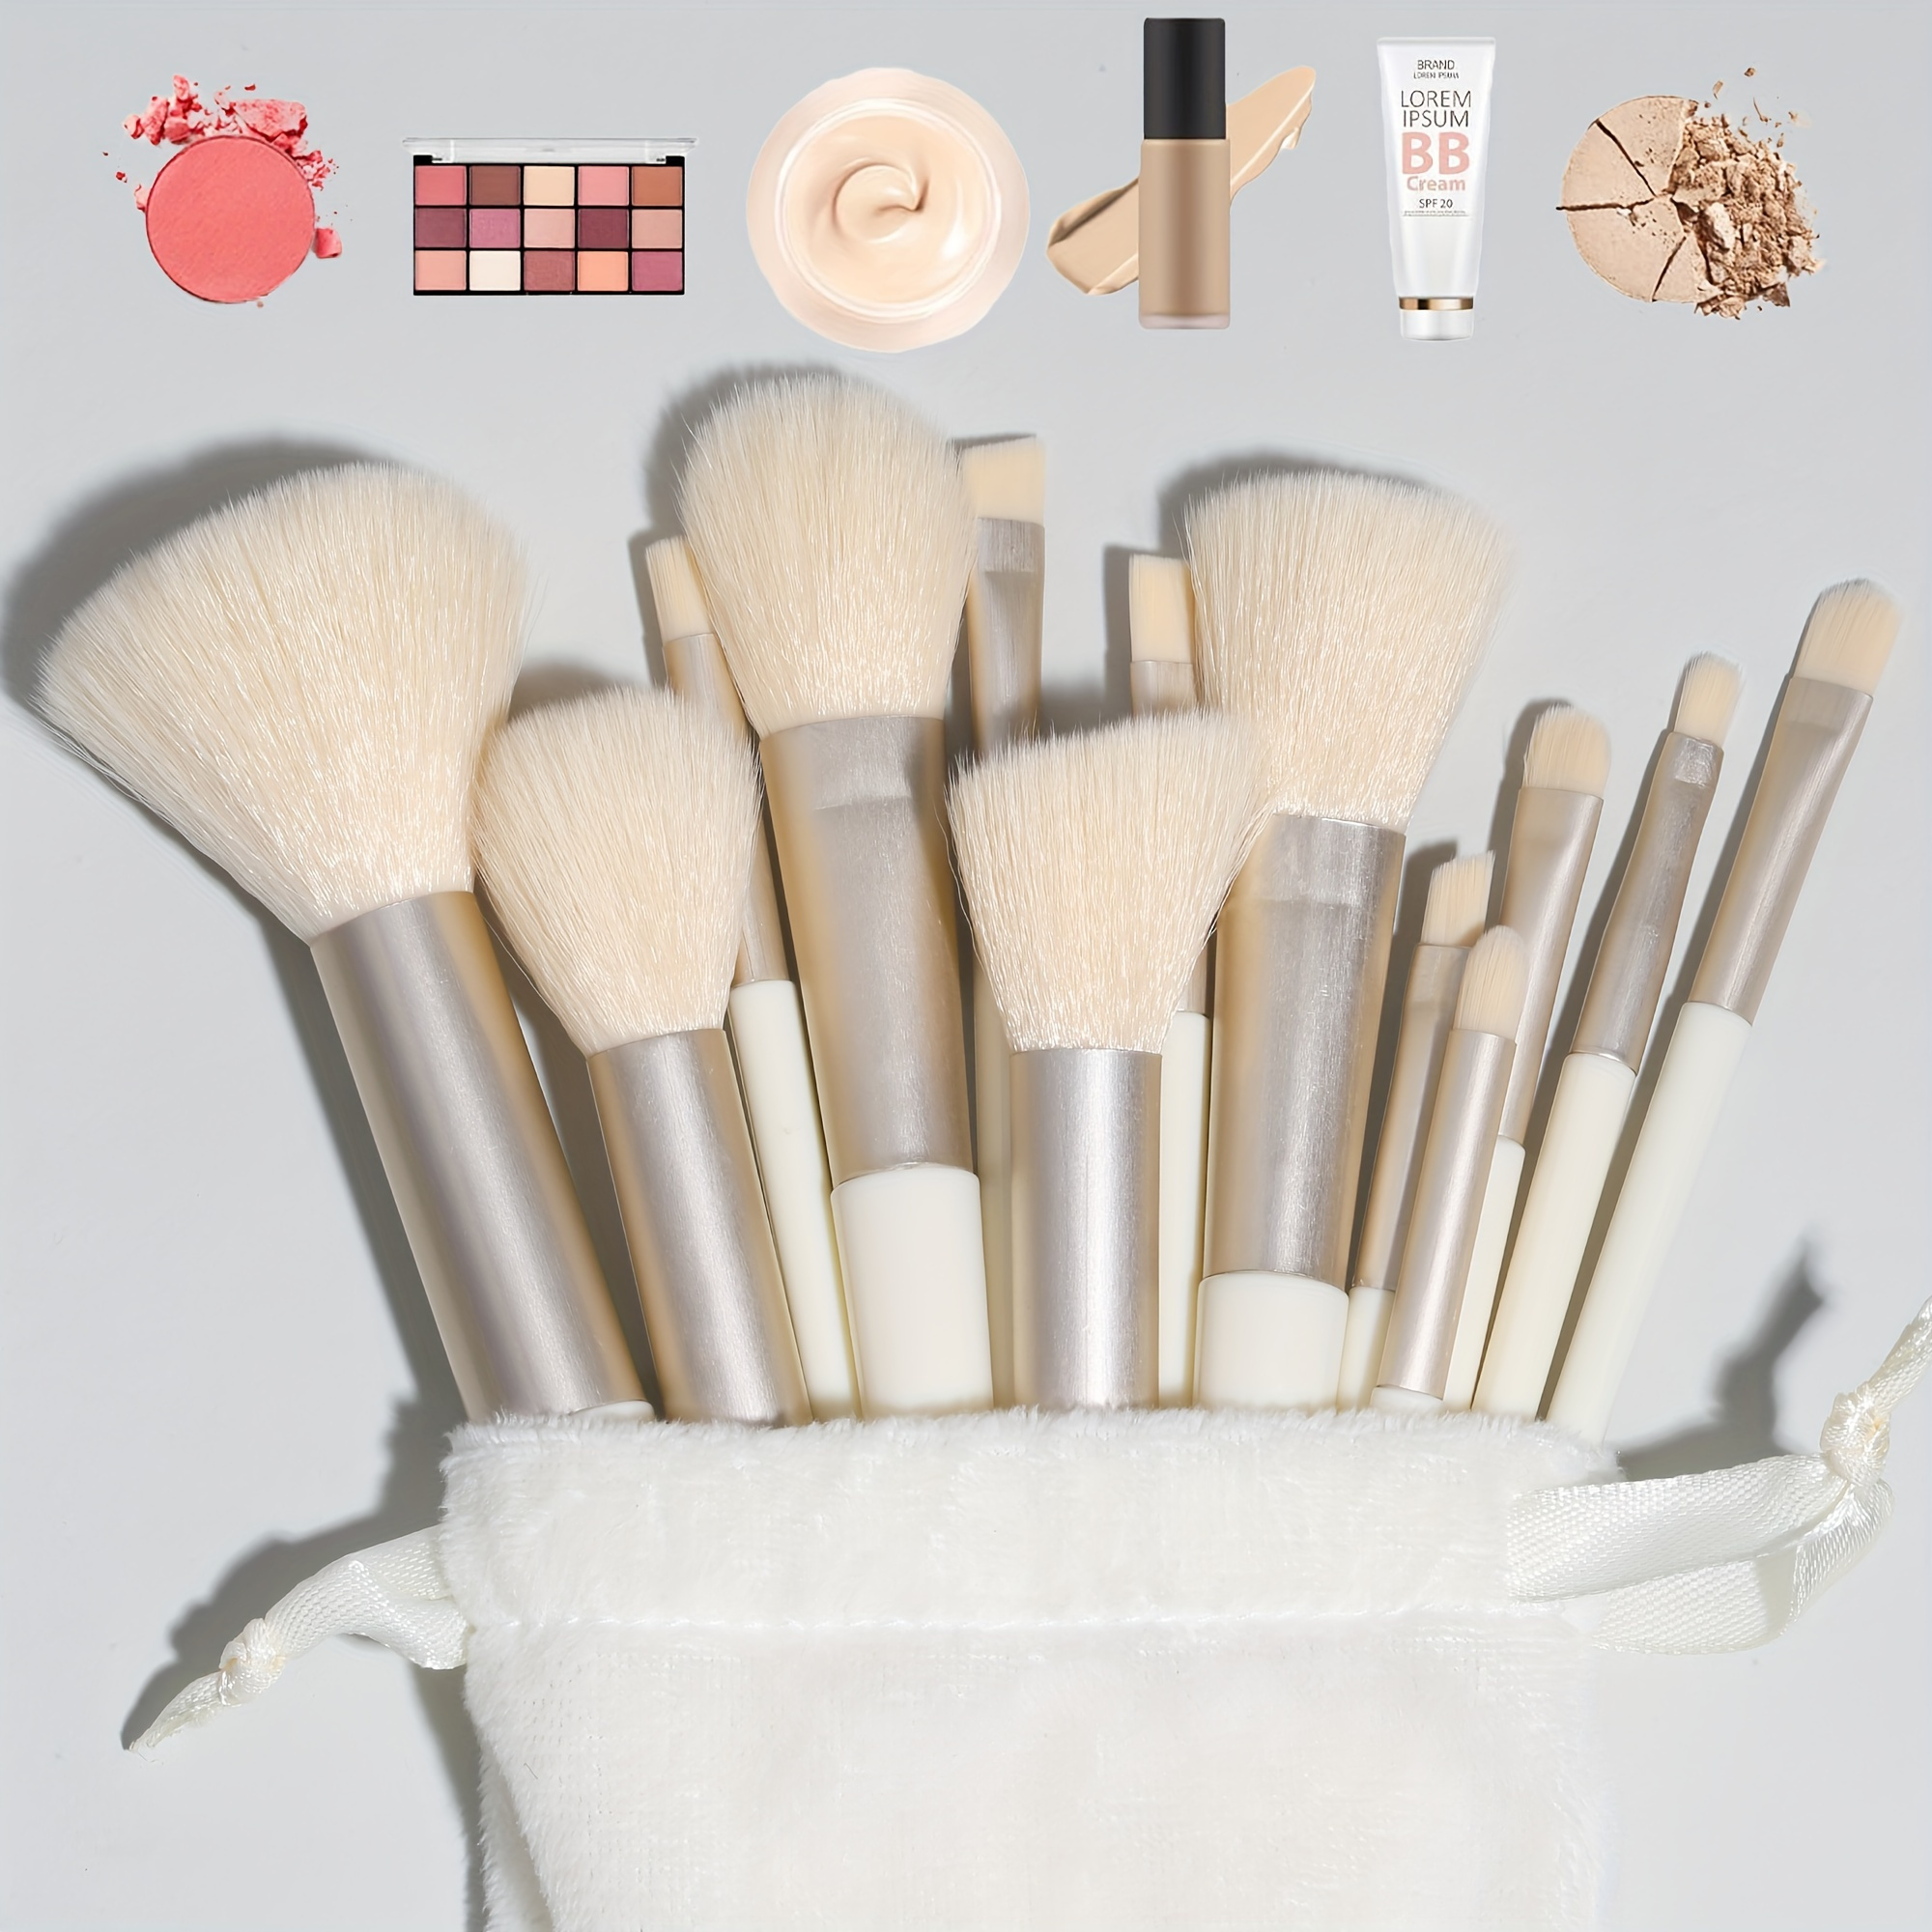 

13-piece Professional Fluffy Makeup Brush Set With Storage Pouch, Ideal For Foundation, Eyeshadow, Blush Application And Blending, Multifunctional Cosmetics Tools For Flawless Finish